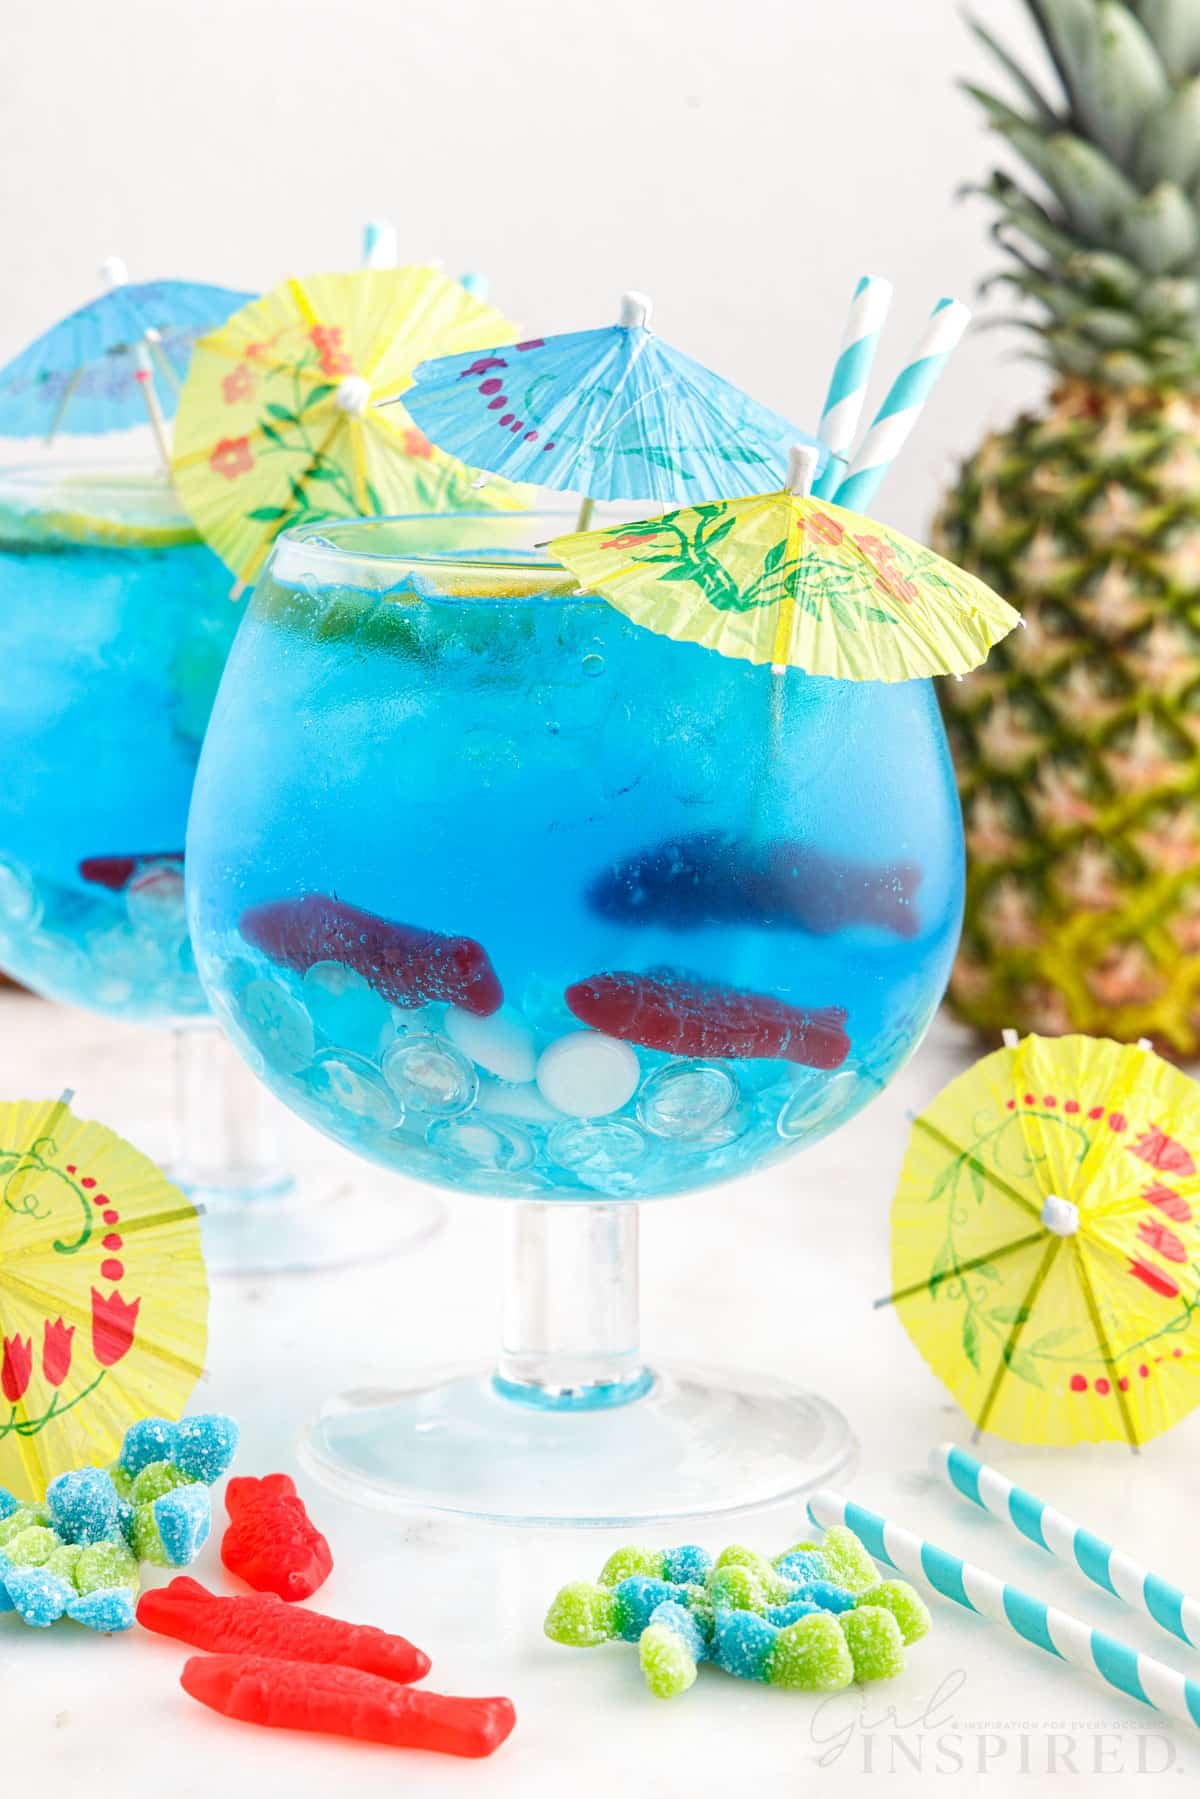 Drink umbrellas added to goblets of Fish Bowl Drinks.